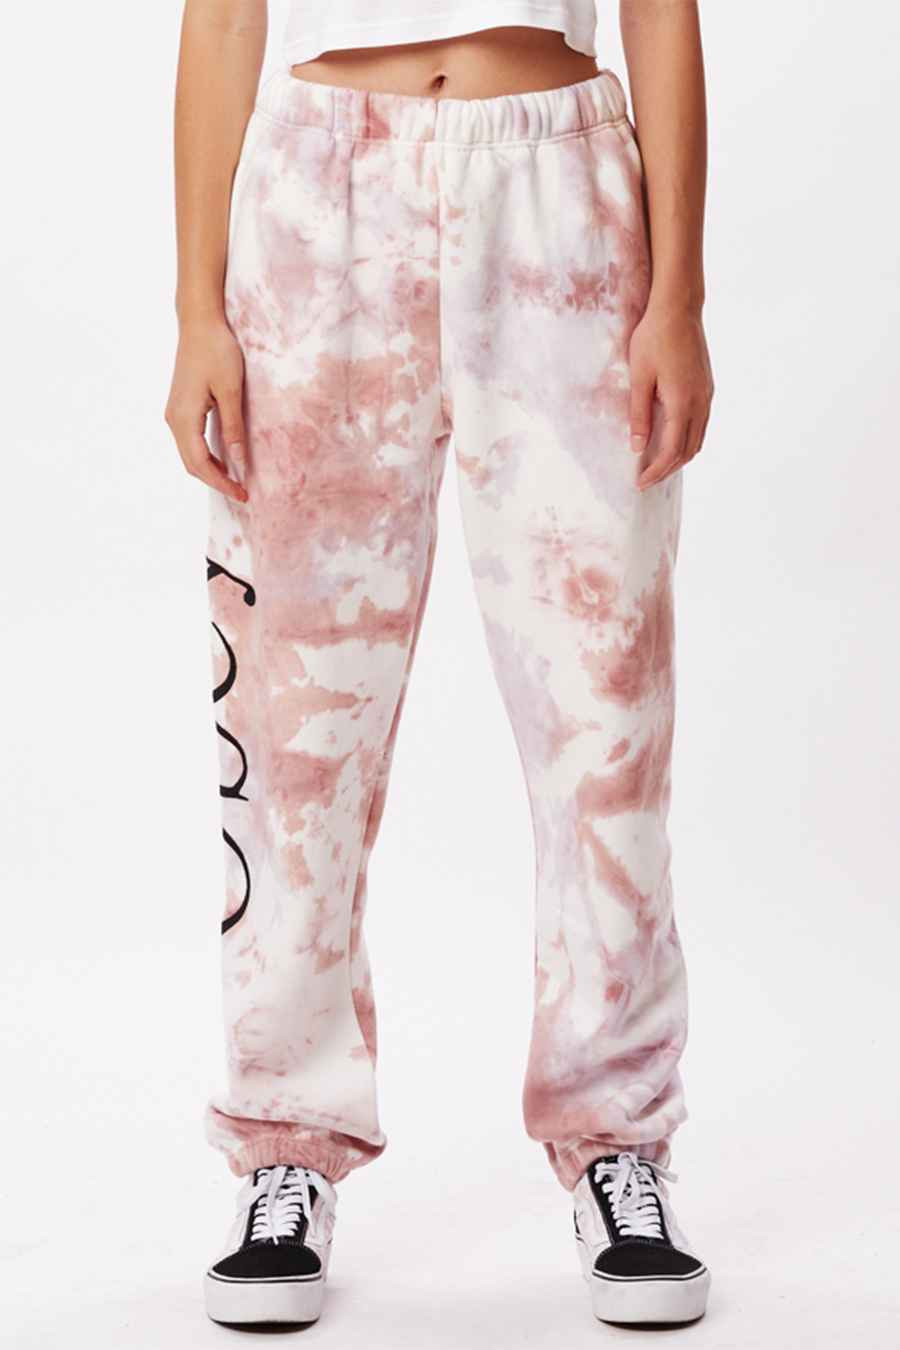 Limitless Sweatpant | Pink Amethyst Multi - Main Image Number 1 of 2